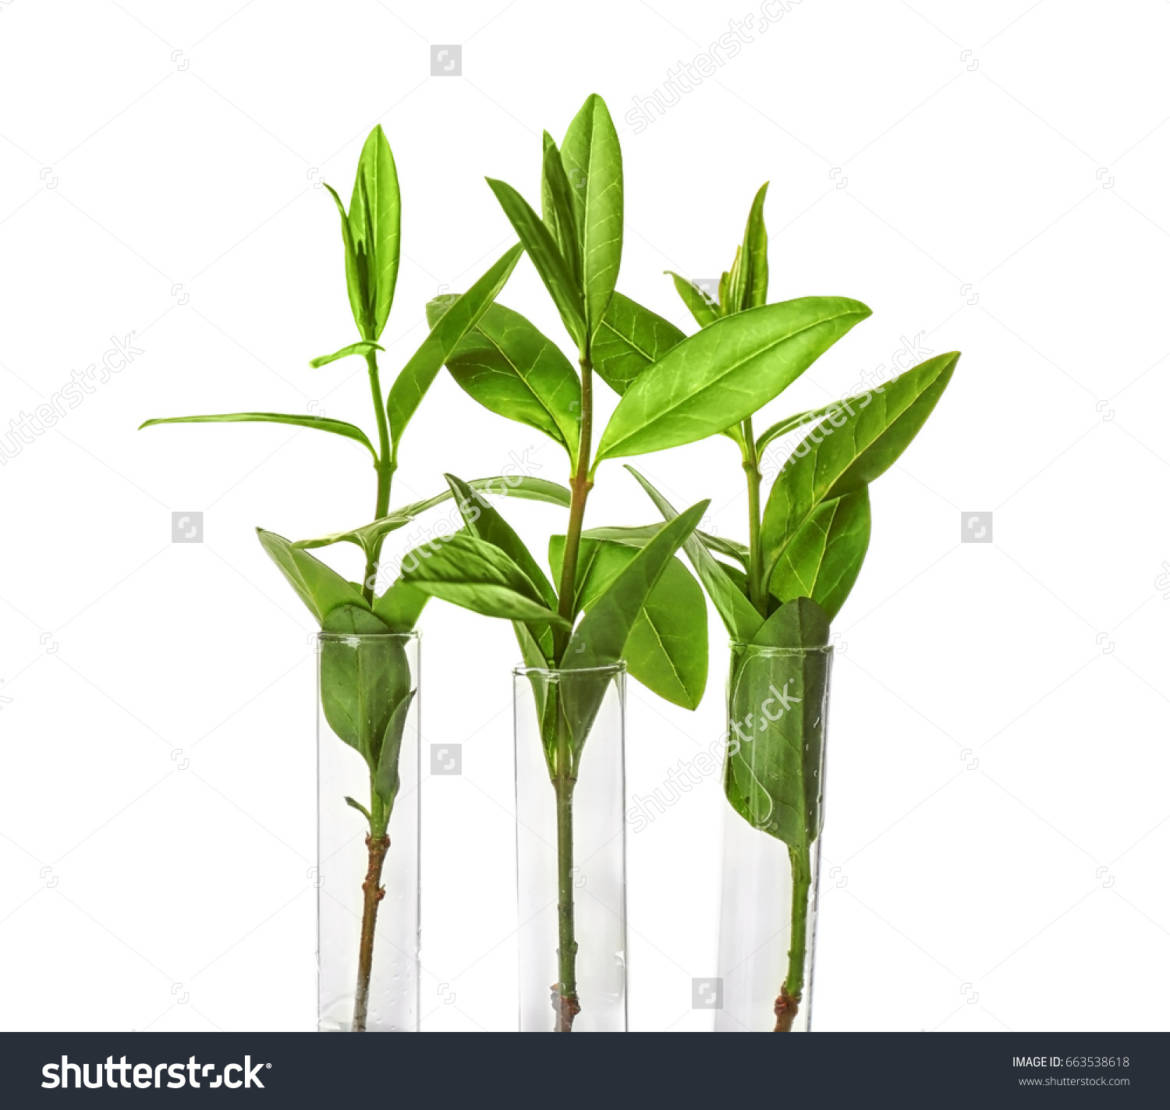 stock-photo-plant-in-glass-tubes-isolated-on-white-663538618.jpg